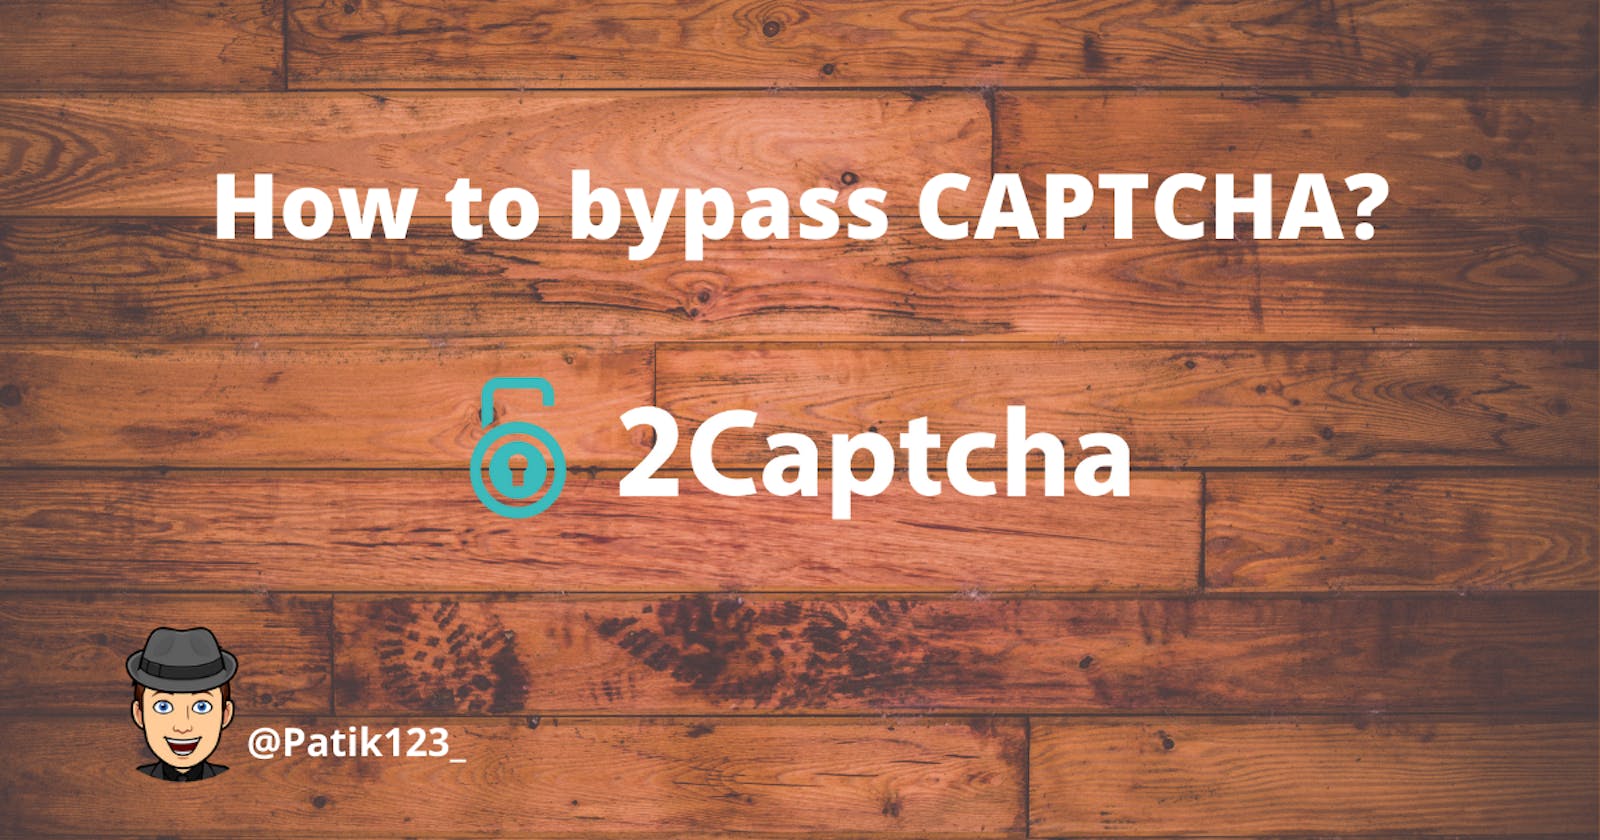 How to bypass CAPTCHA?